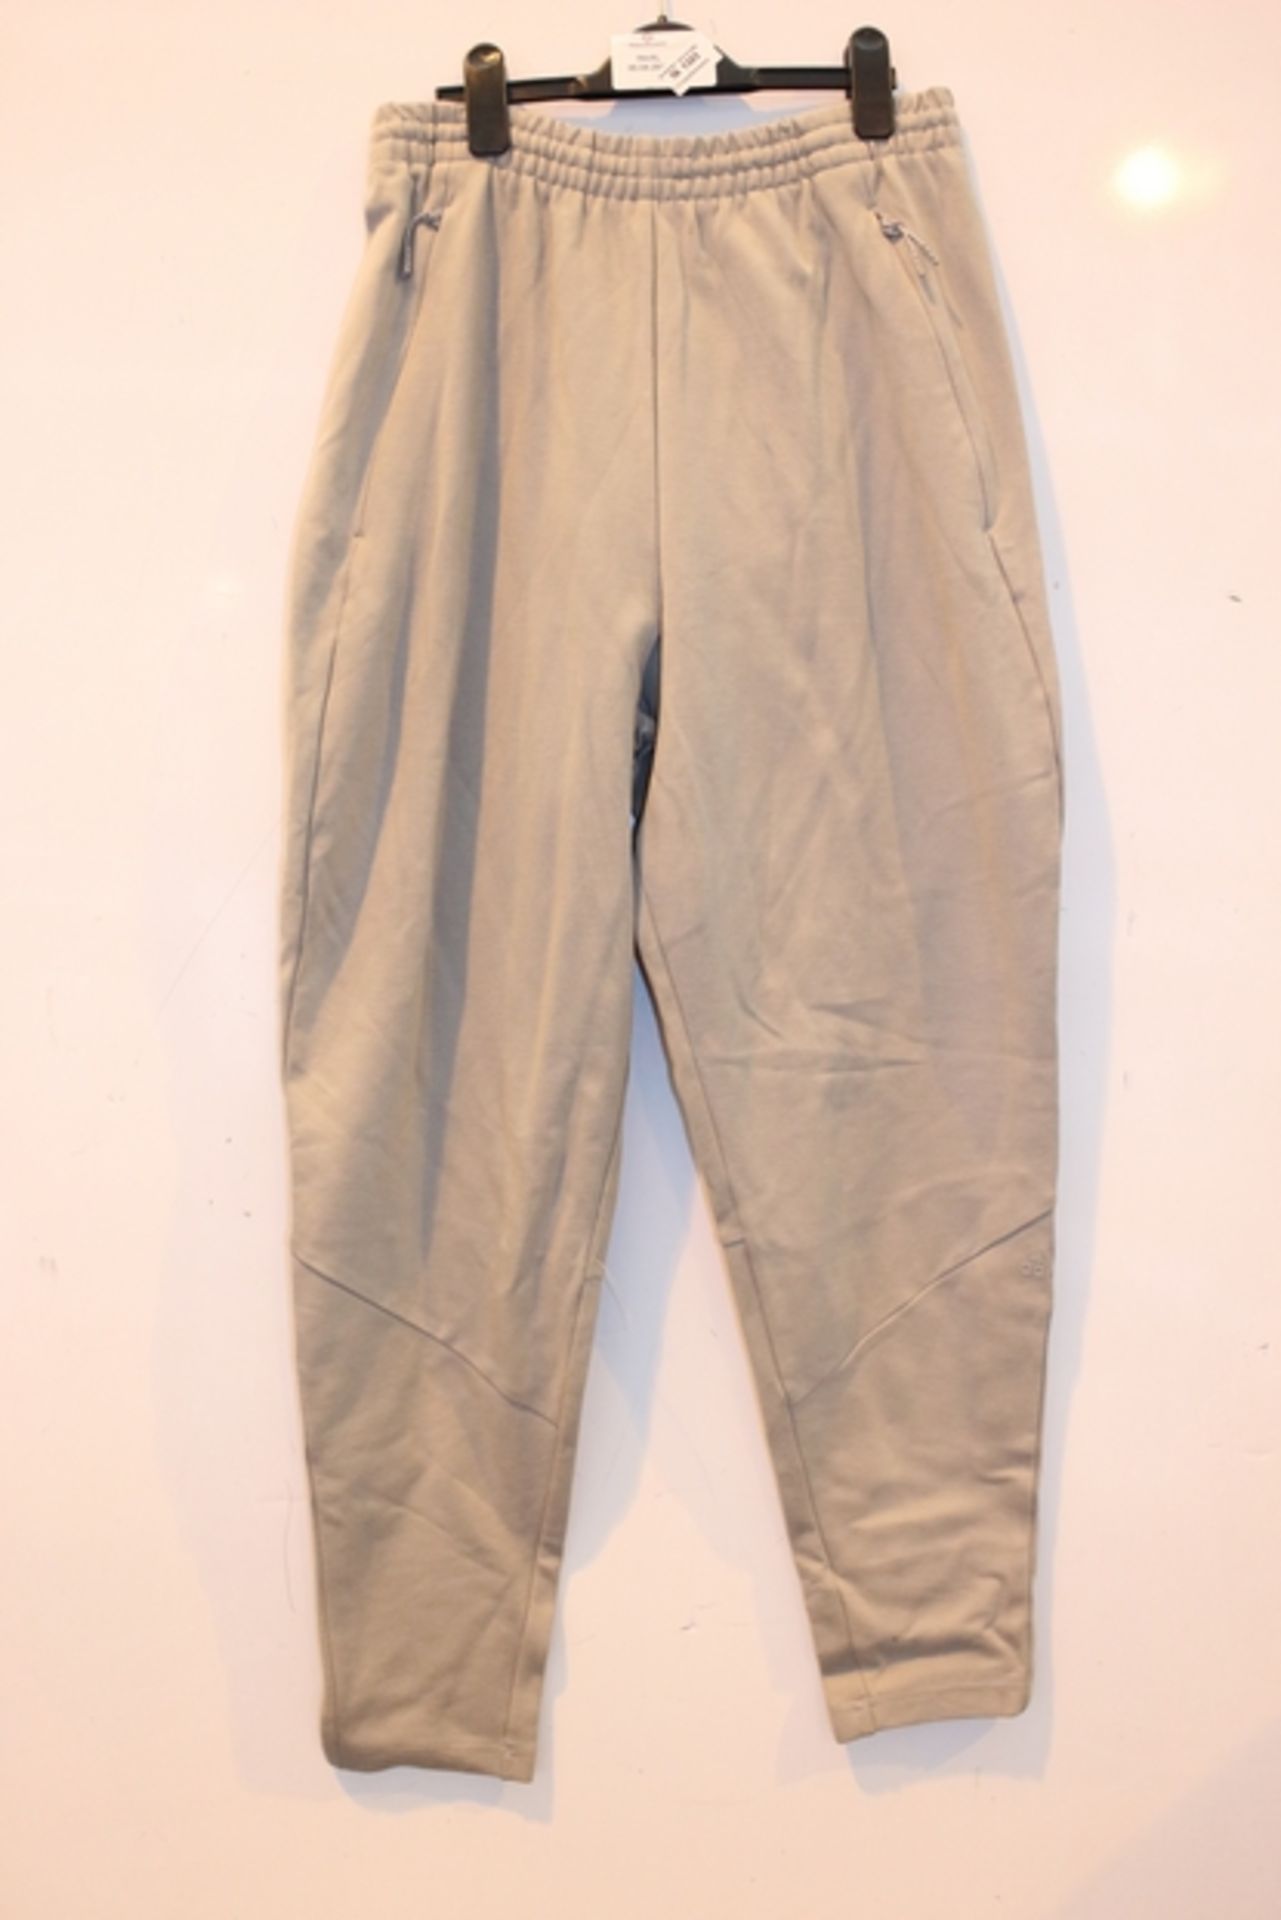 1X PAIR OF NIKE JOGGING BOTTOMS SIZE SMALL (TH-FL) (05/04/17)